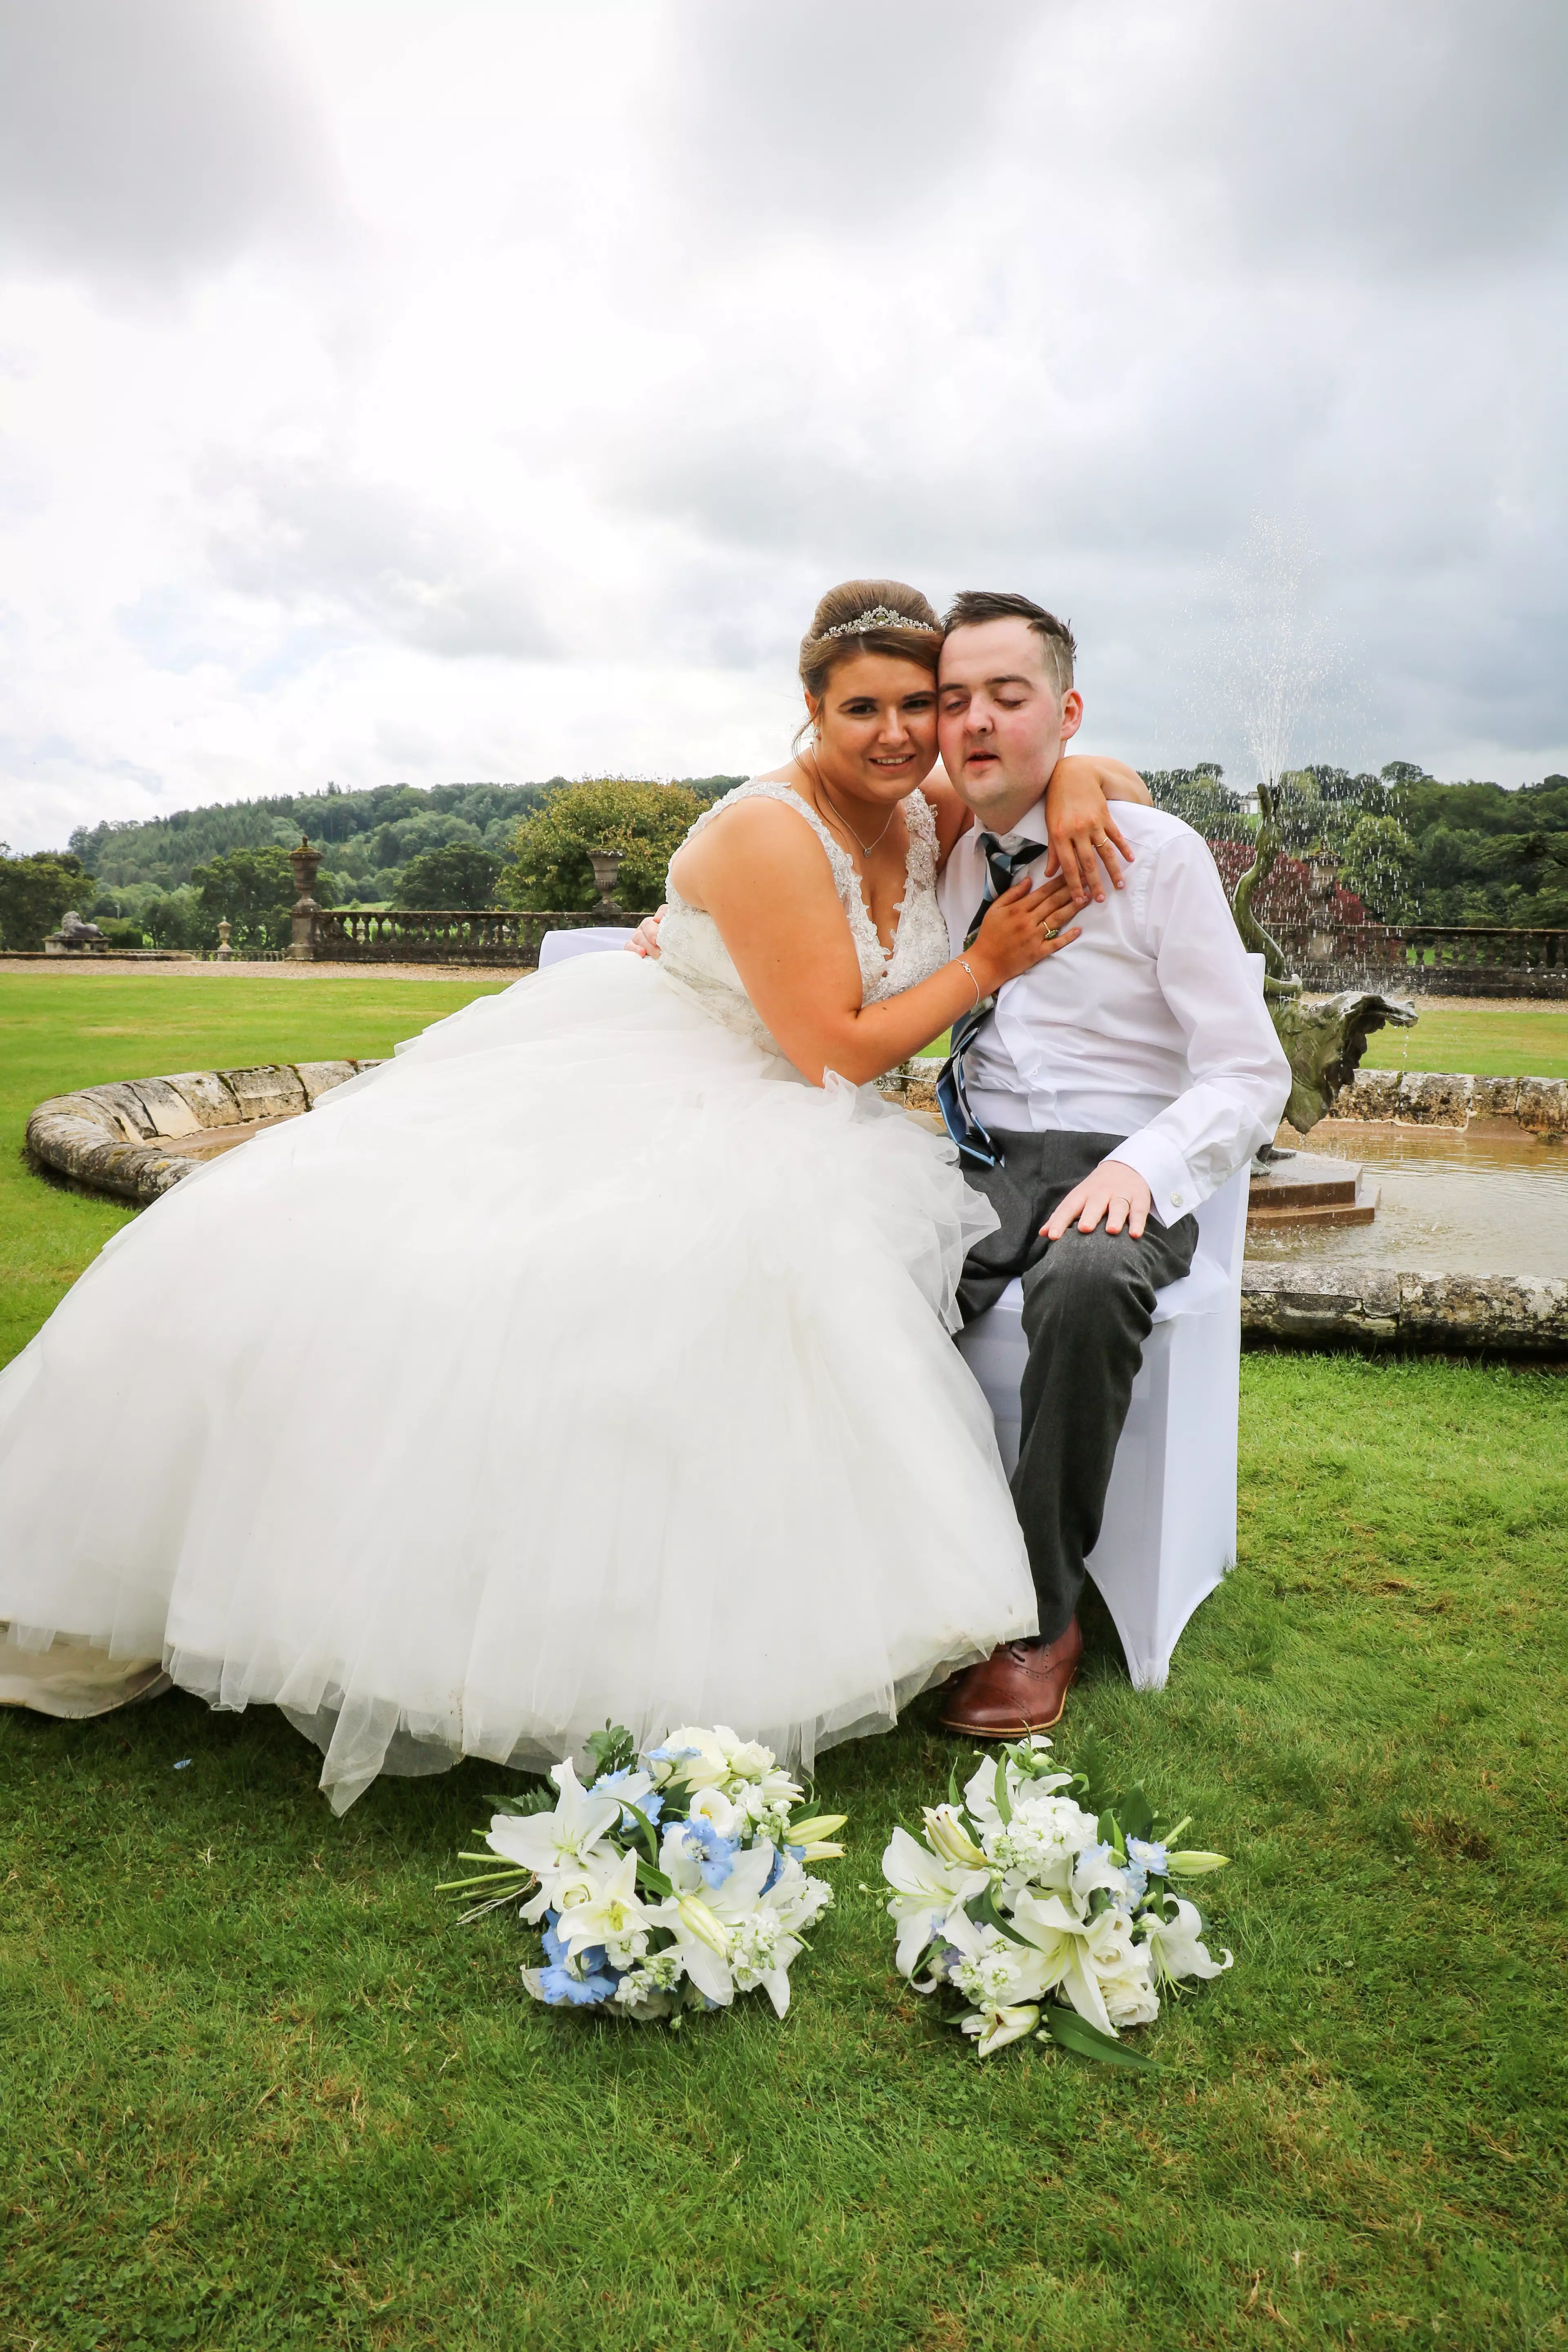 The Devon wedding planner managed to pull the wedding together in two weeks.